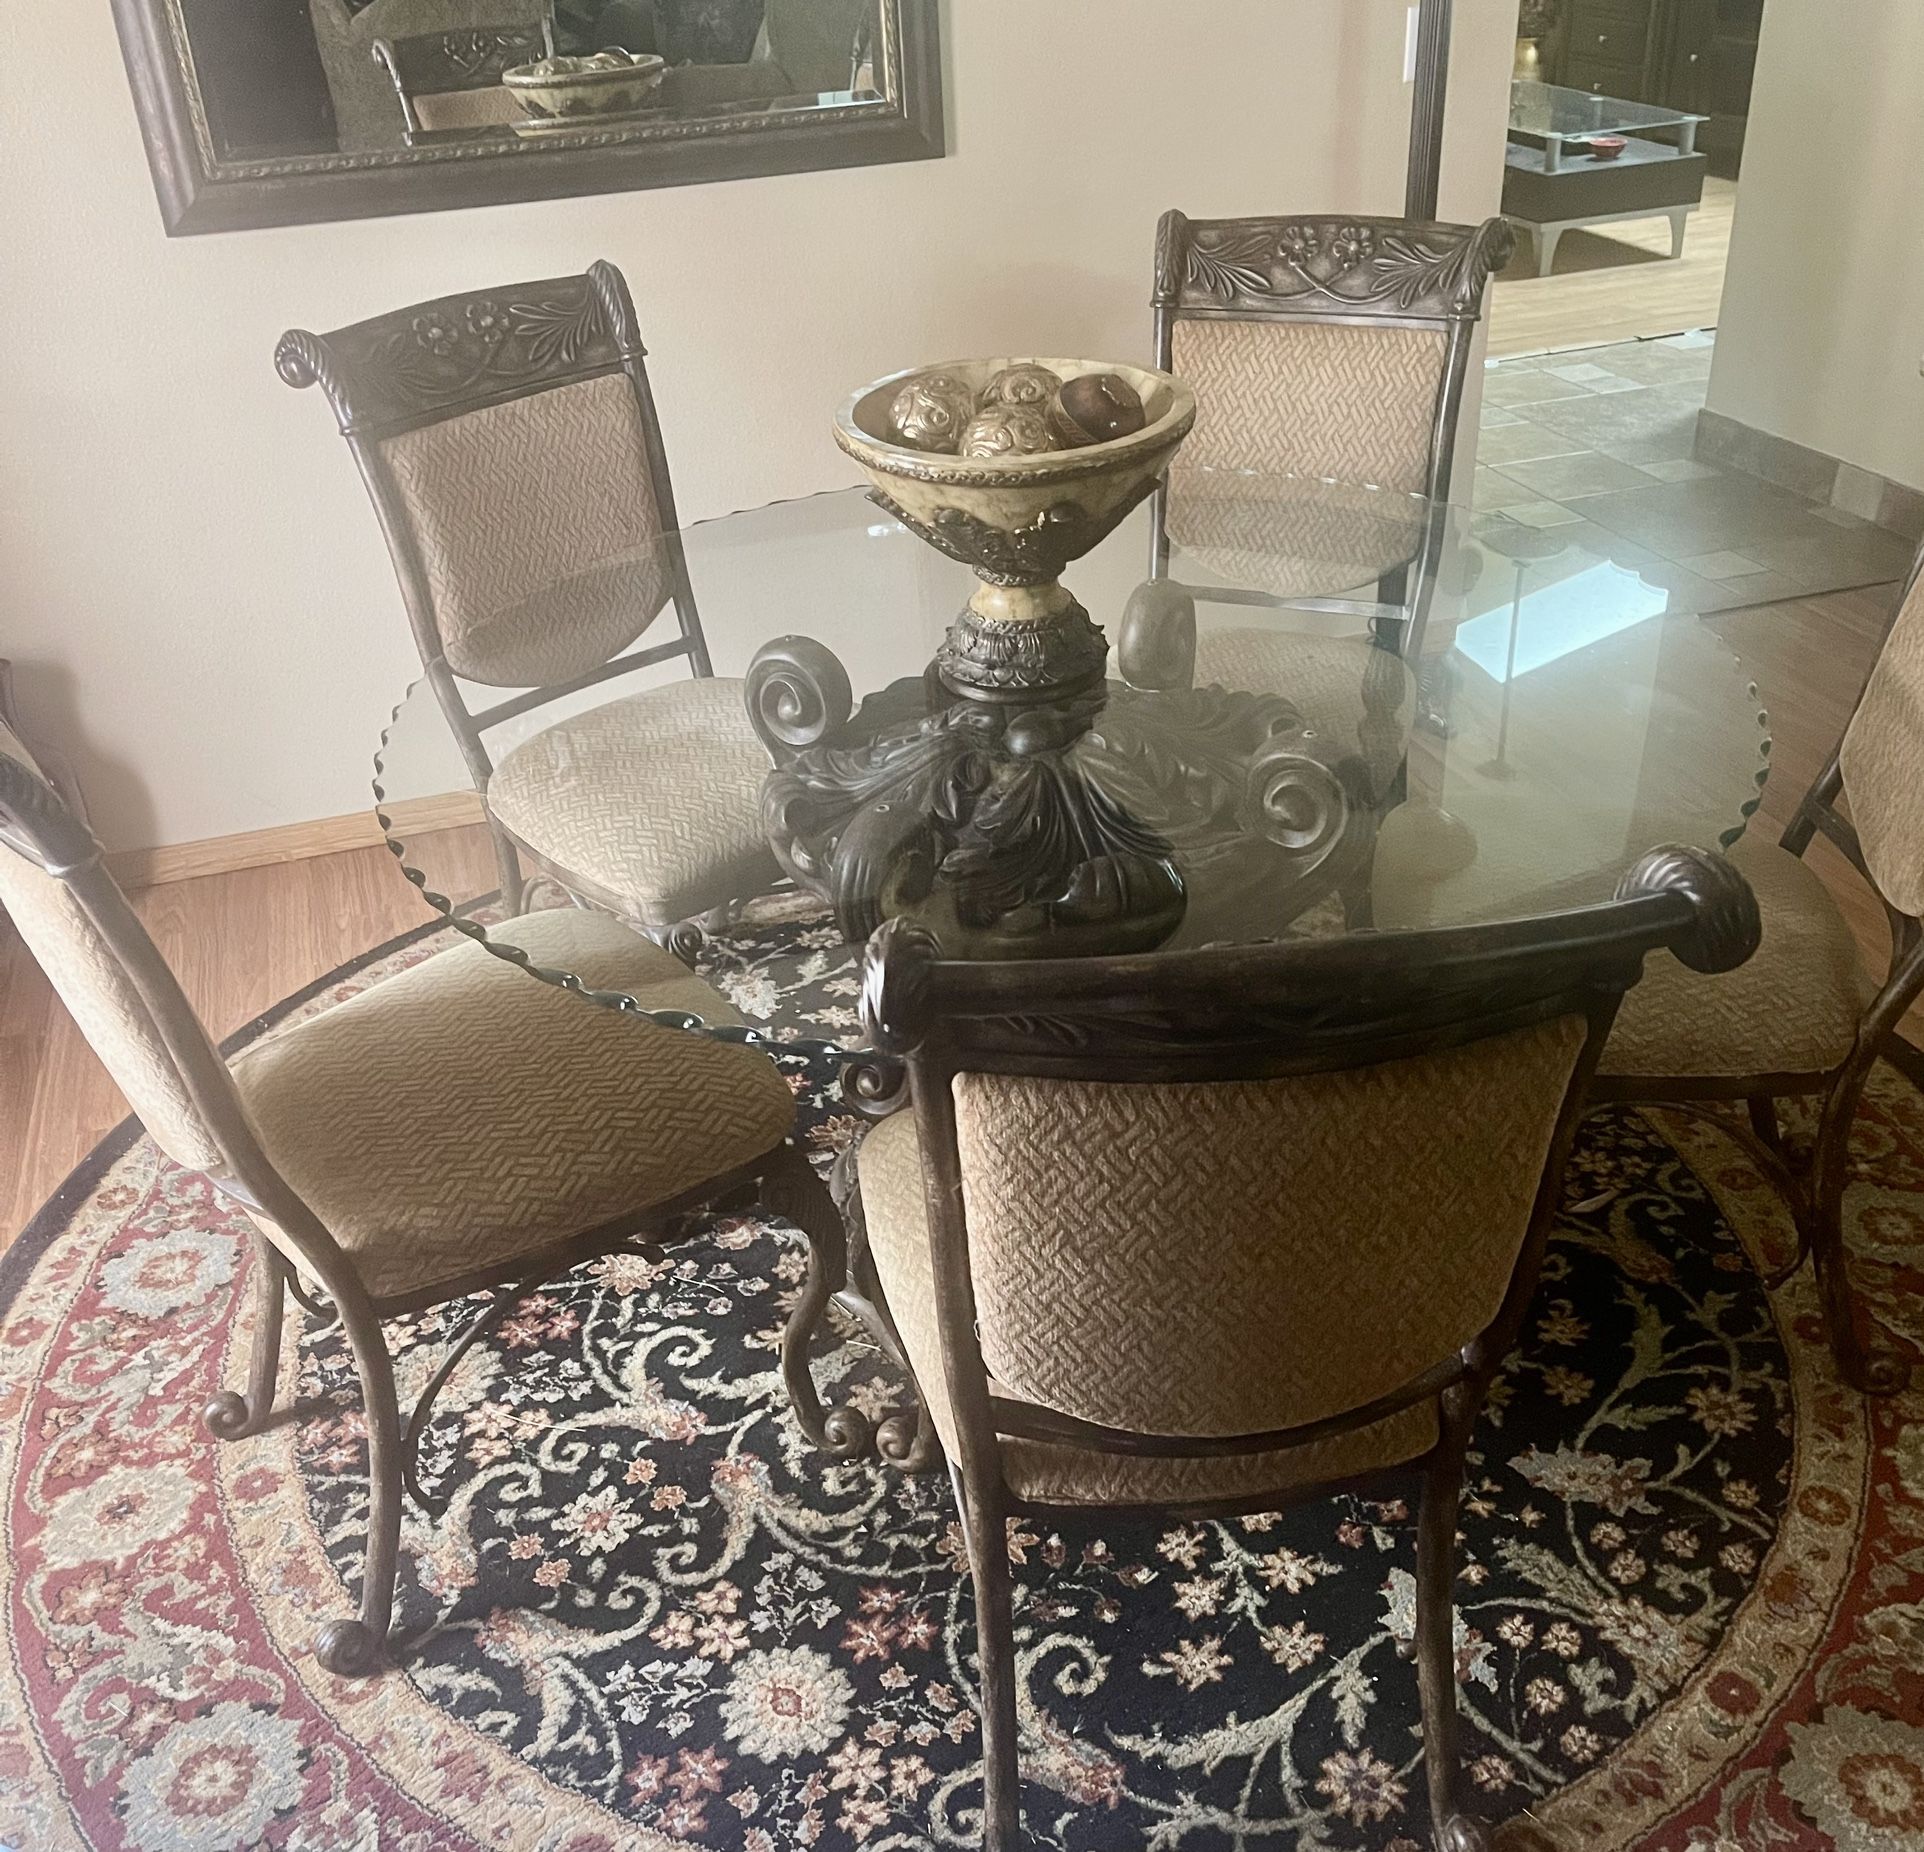 *** Dining Room Set / 5 Chair Table with Hutch ***